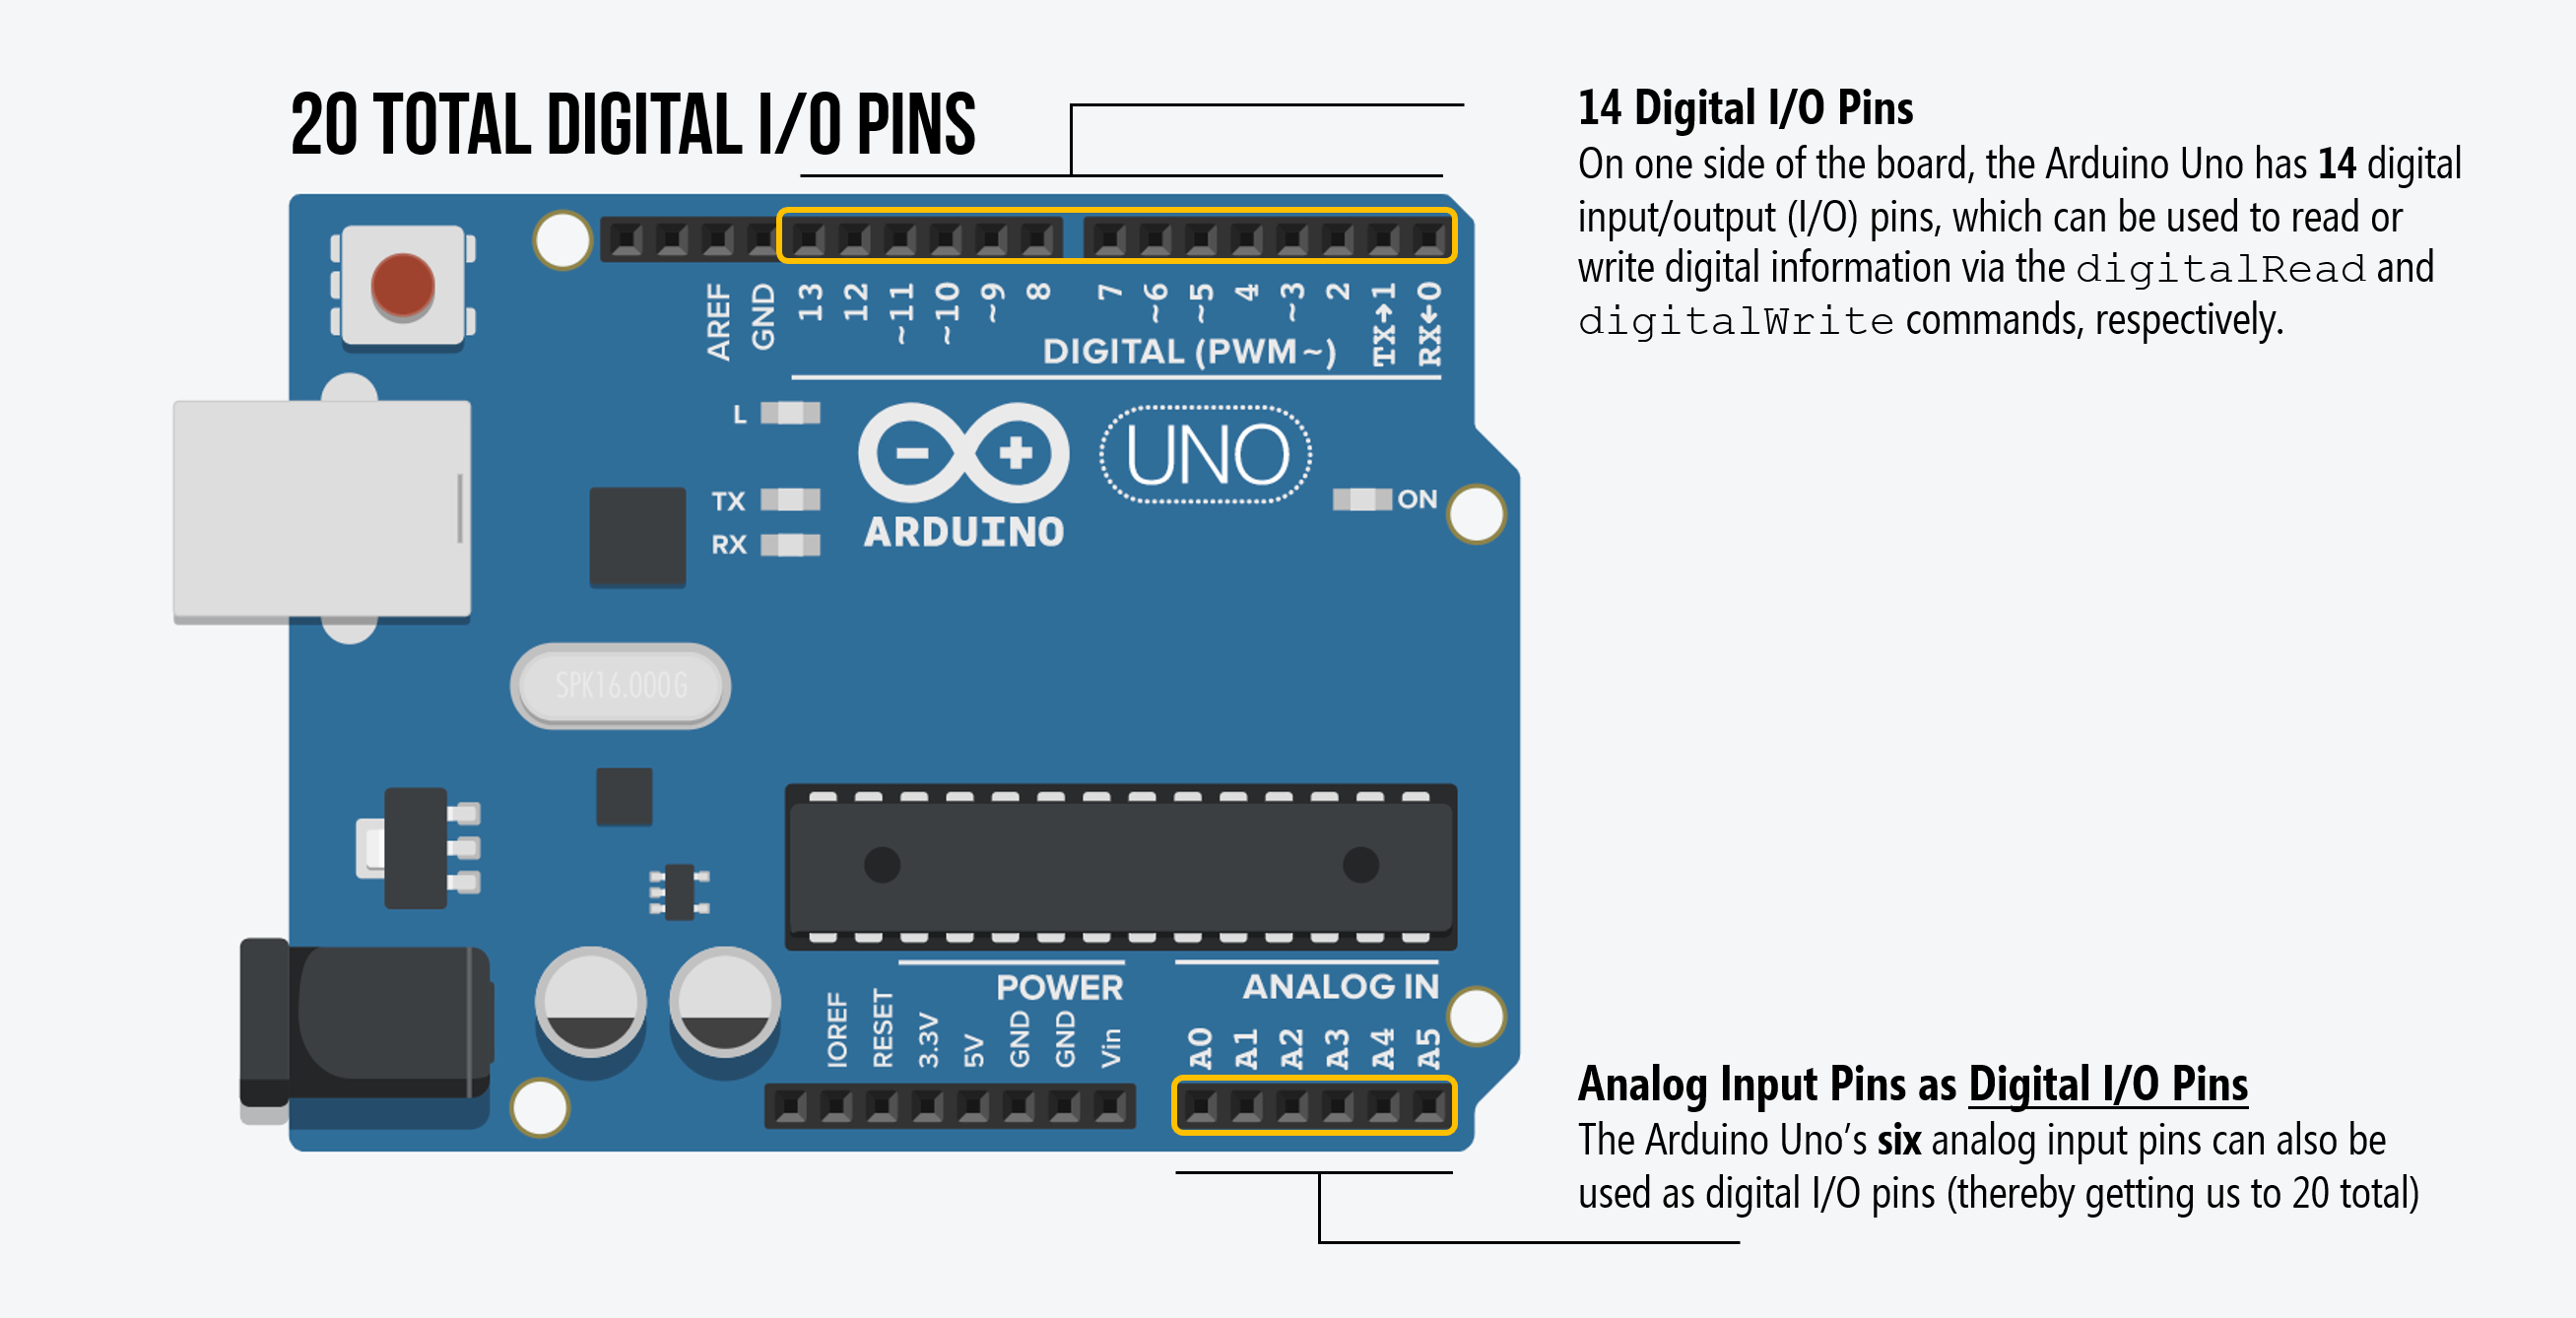 Close-up image of the 20 digital I/O pins on the Arduino Uno